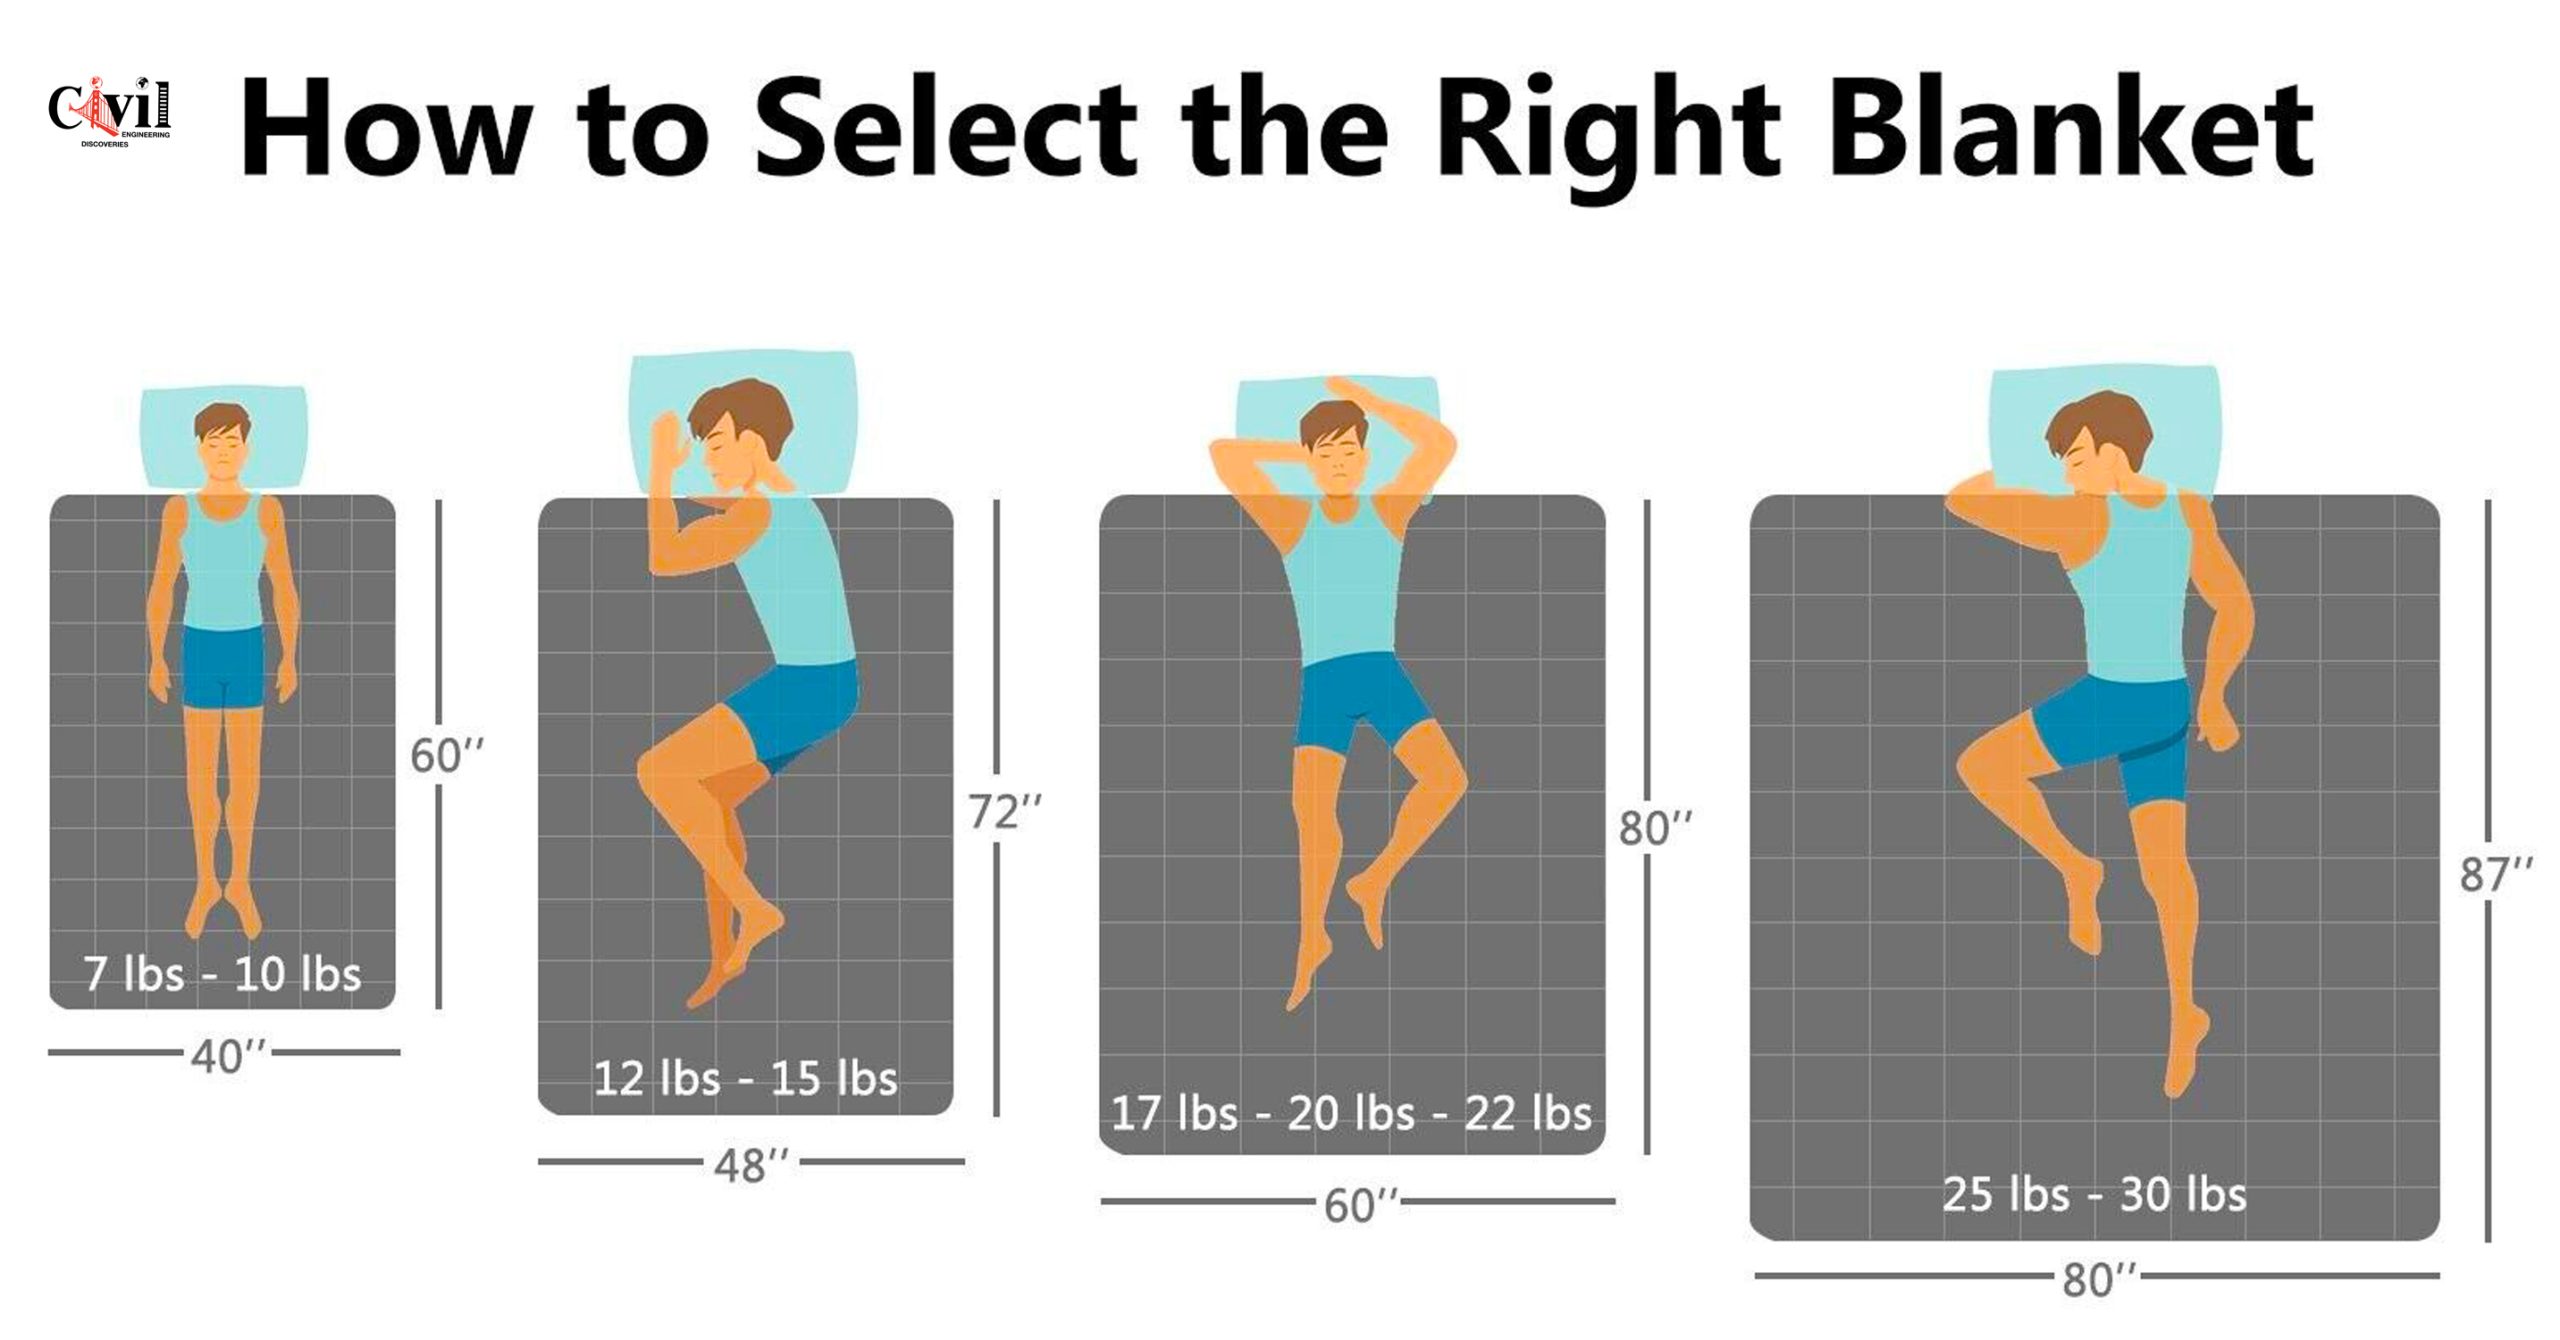 https://engineeringdiscoveries.com/wp-content/uploads/2023/05/Standard-Blanket-Sizes-And-Dimensions-Guide-scaled.jpg